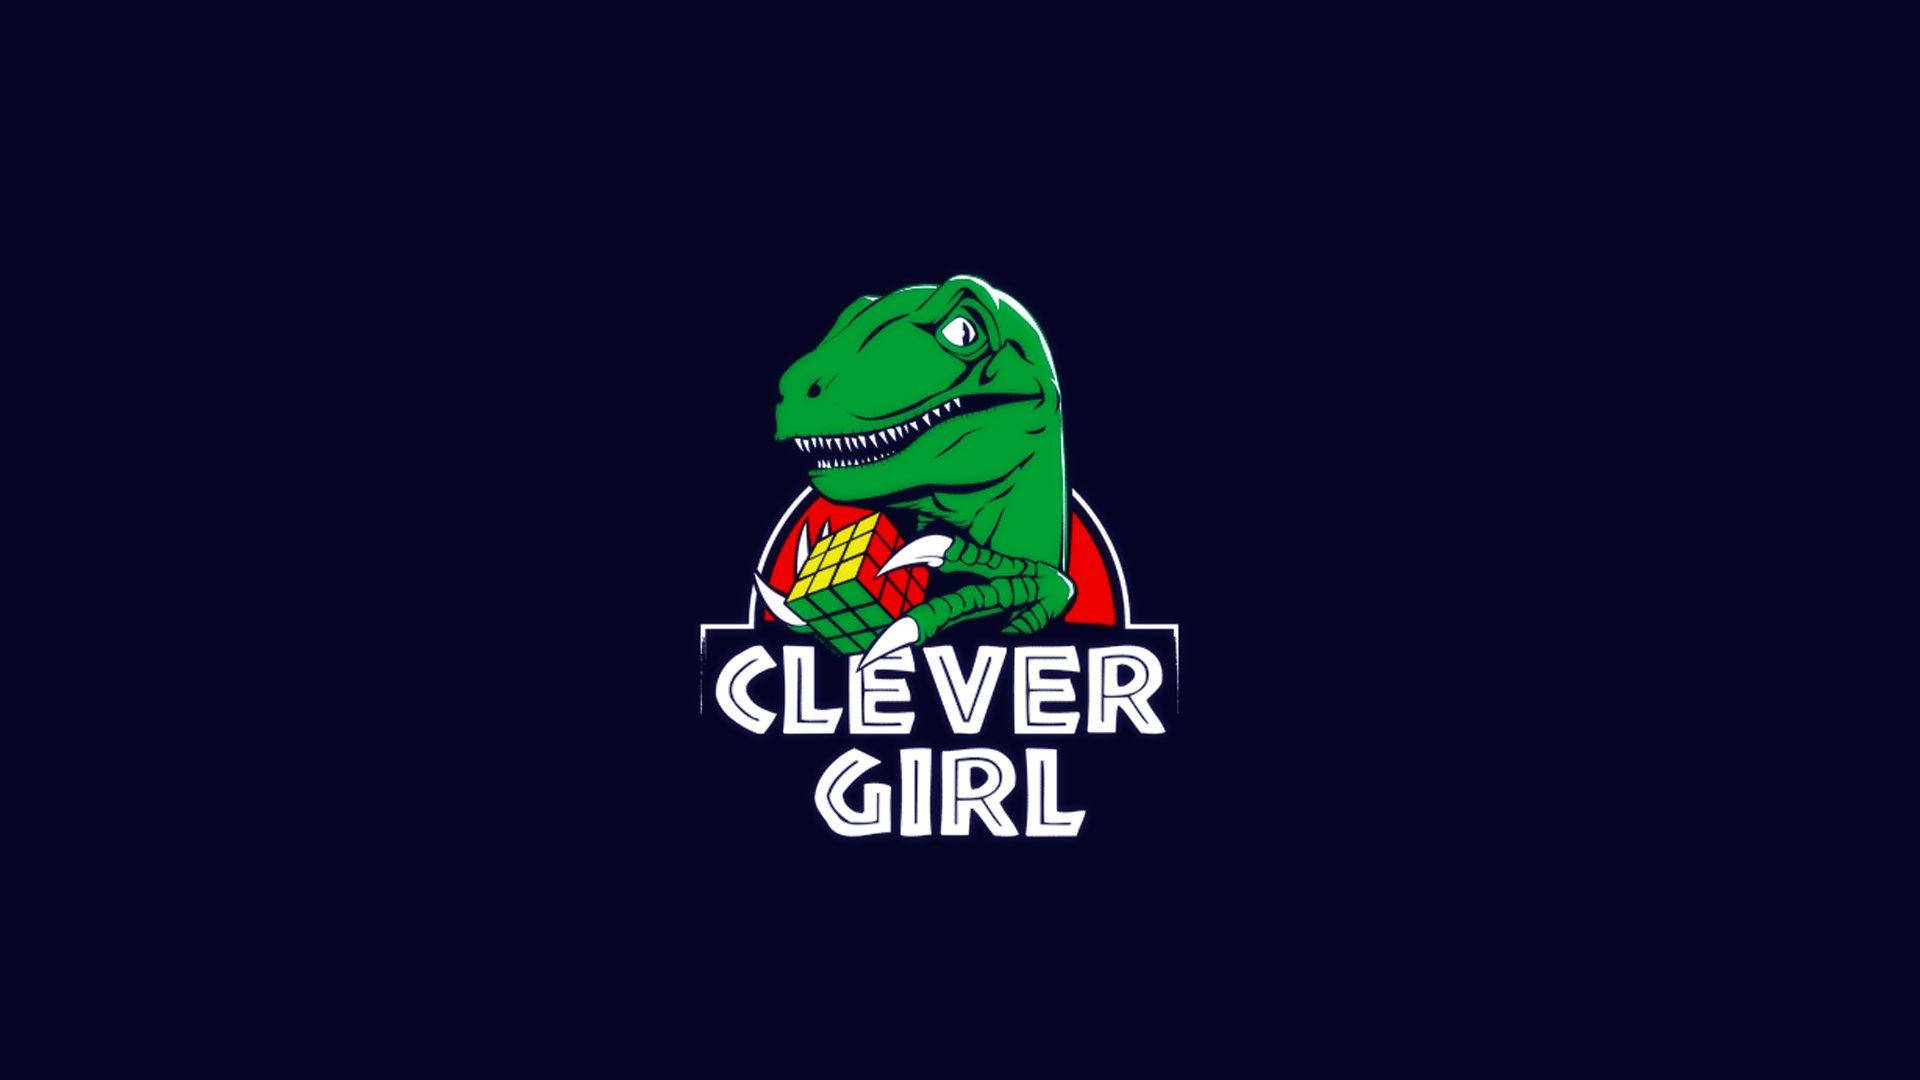 Clever Dinosaur With Rubik's Cube Background